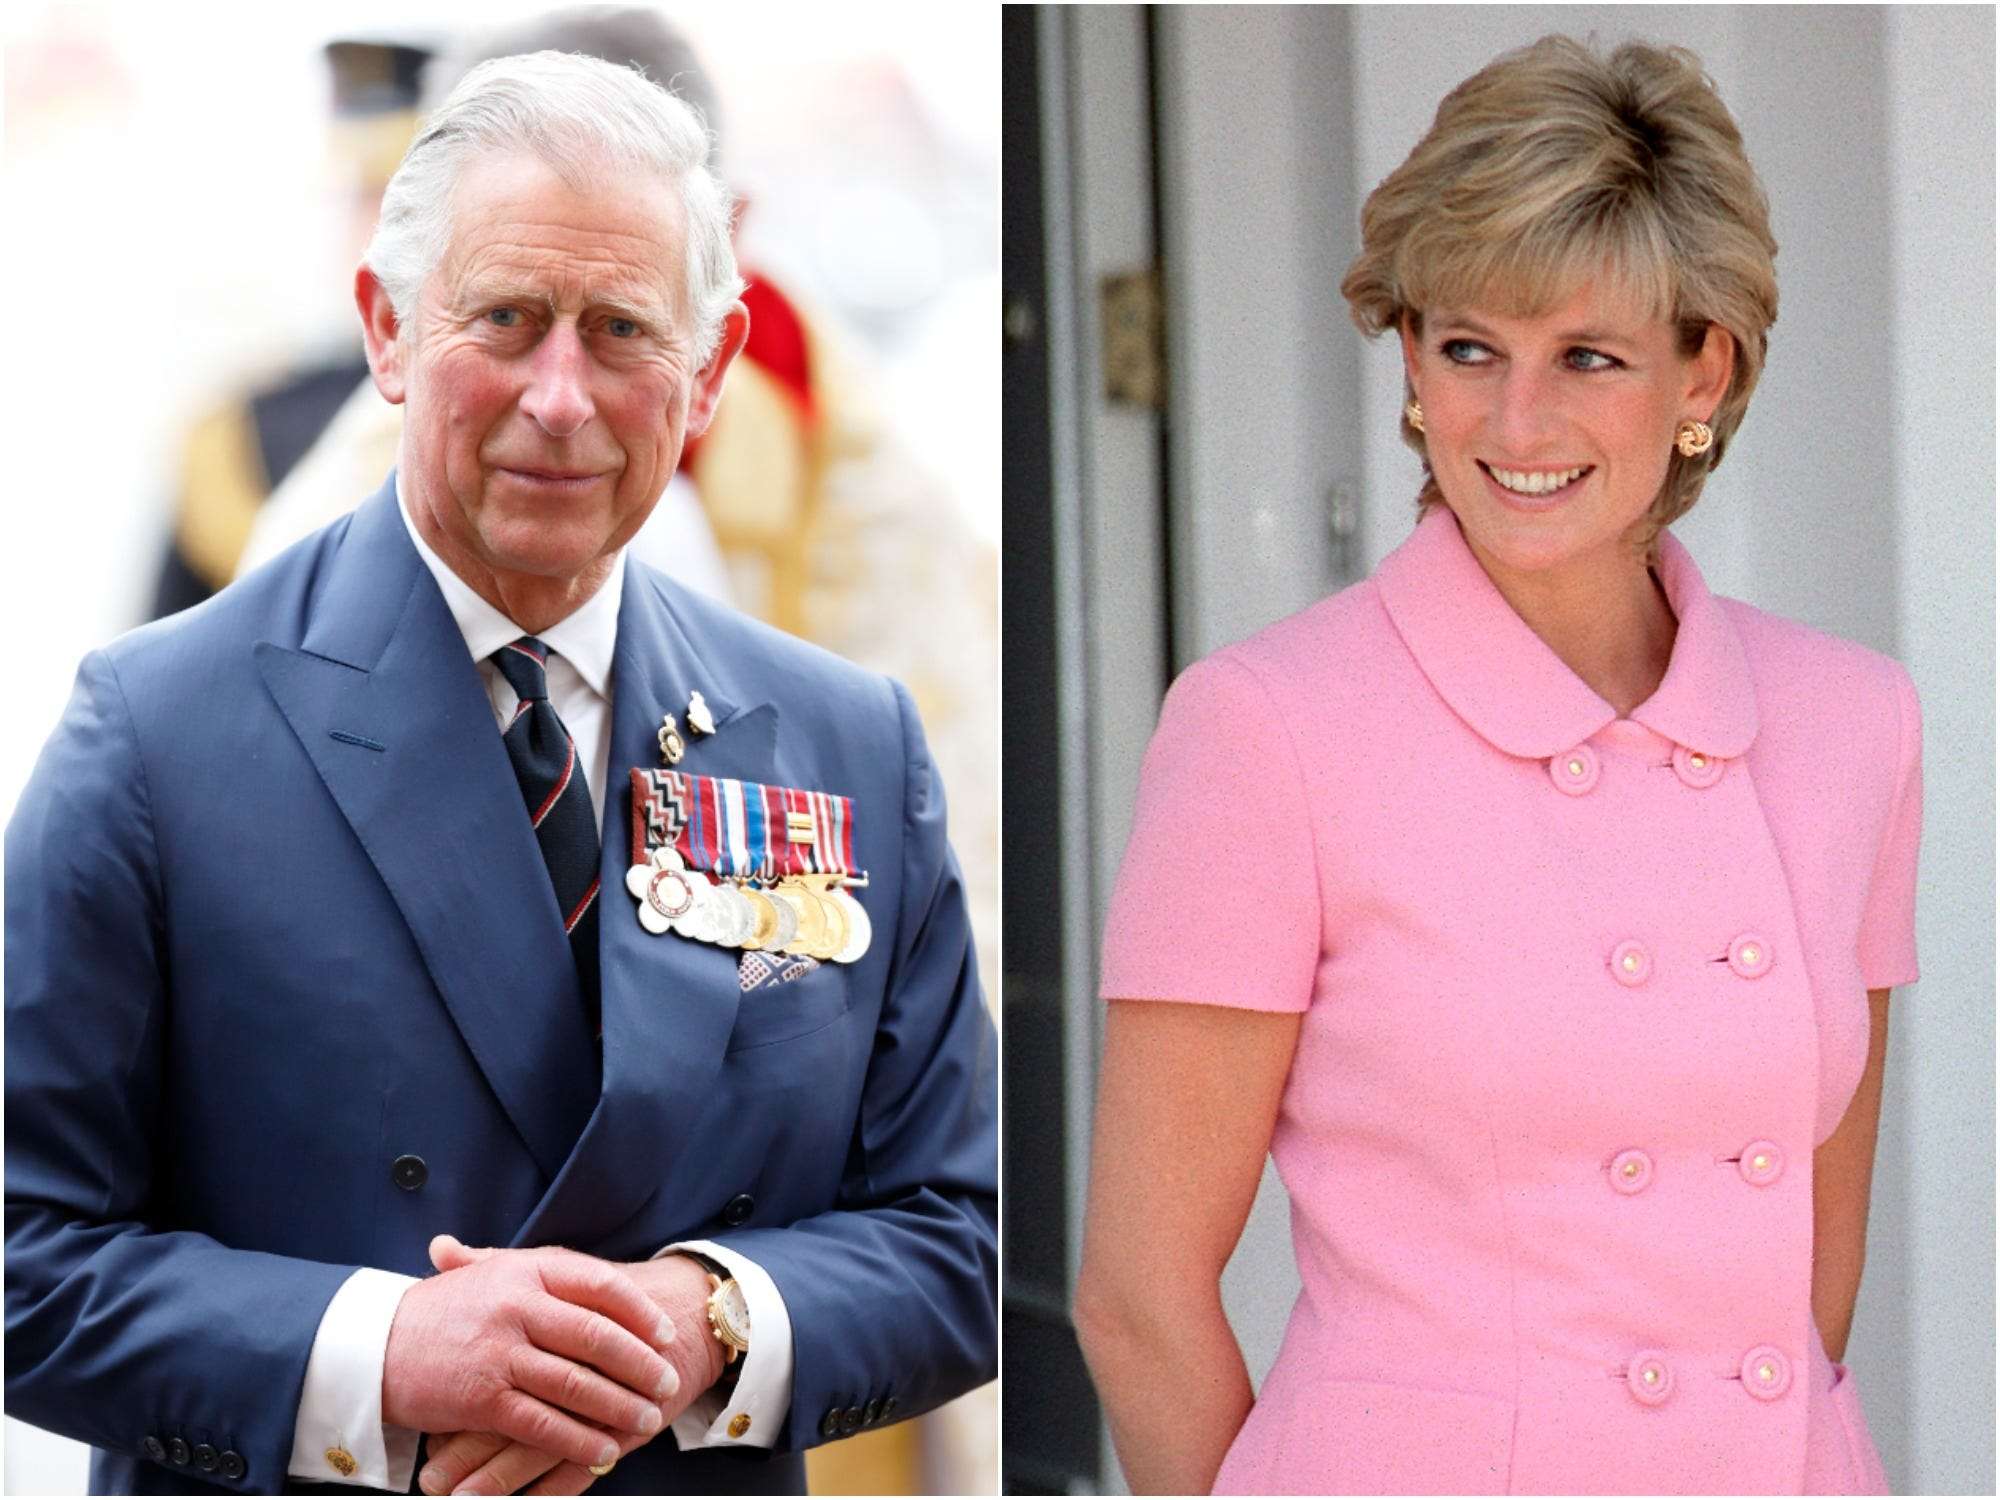 A former police chief says he questioned Prince Charles over a note ...